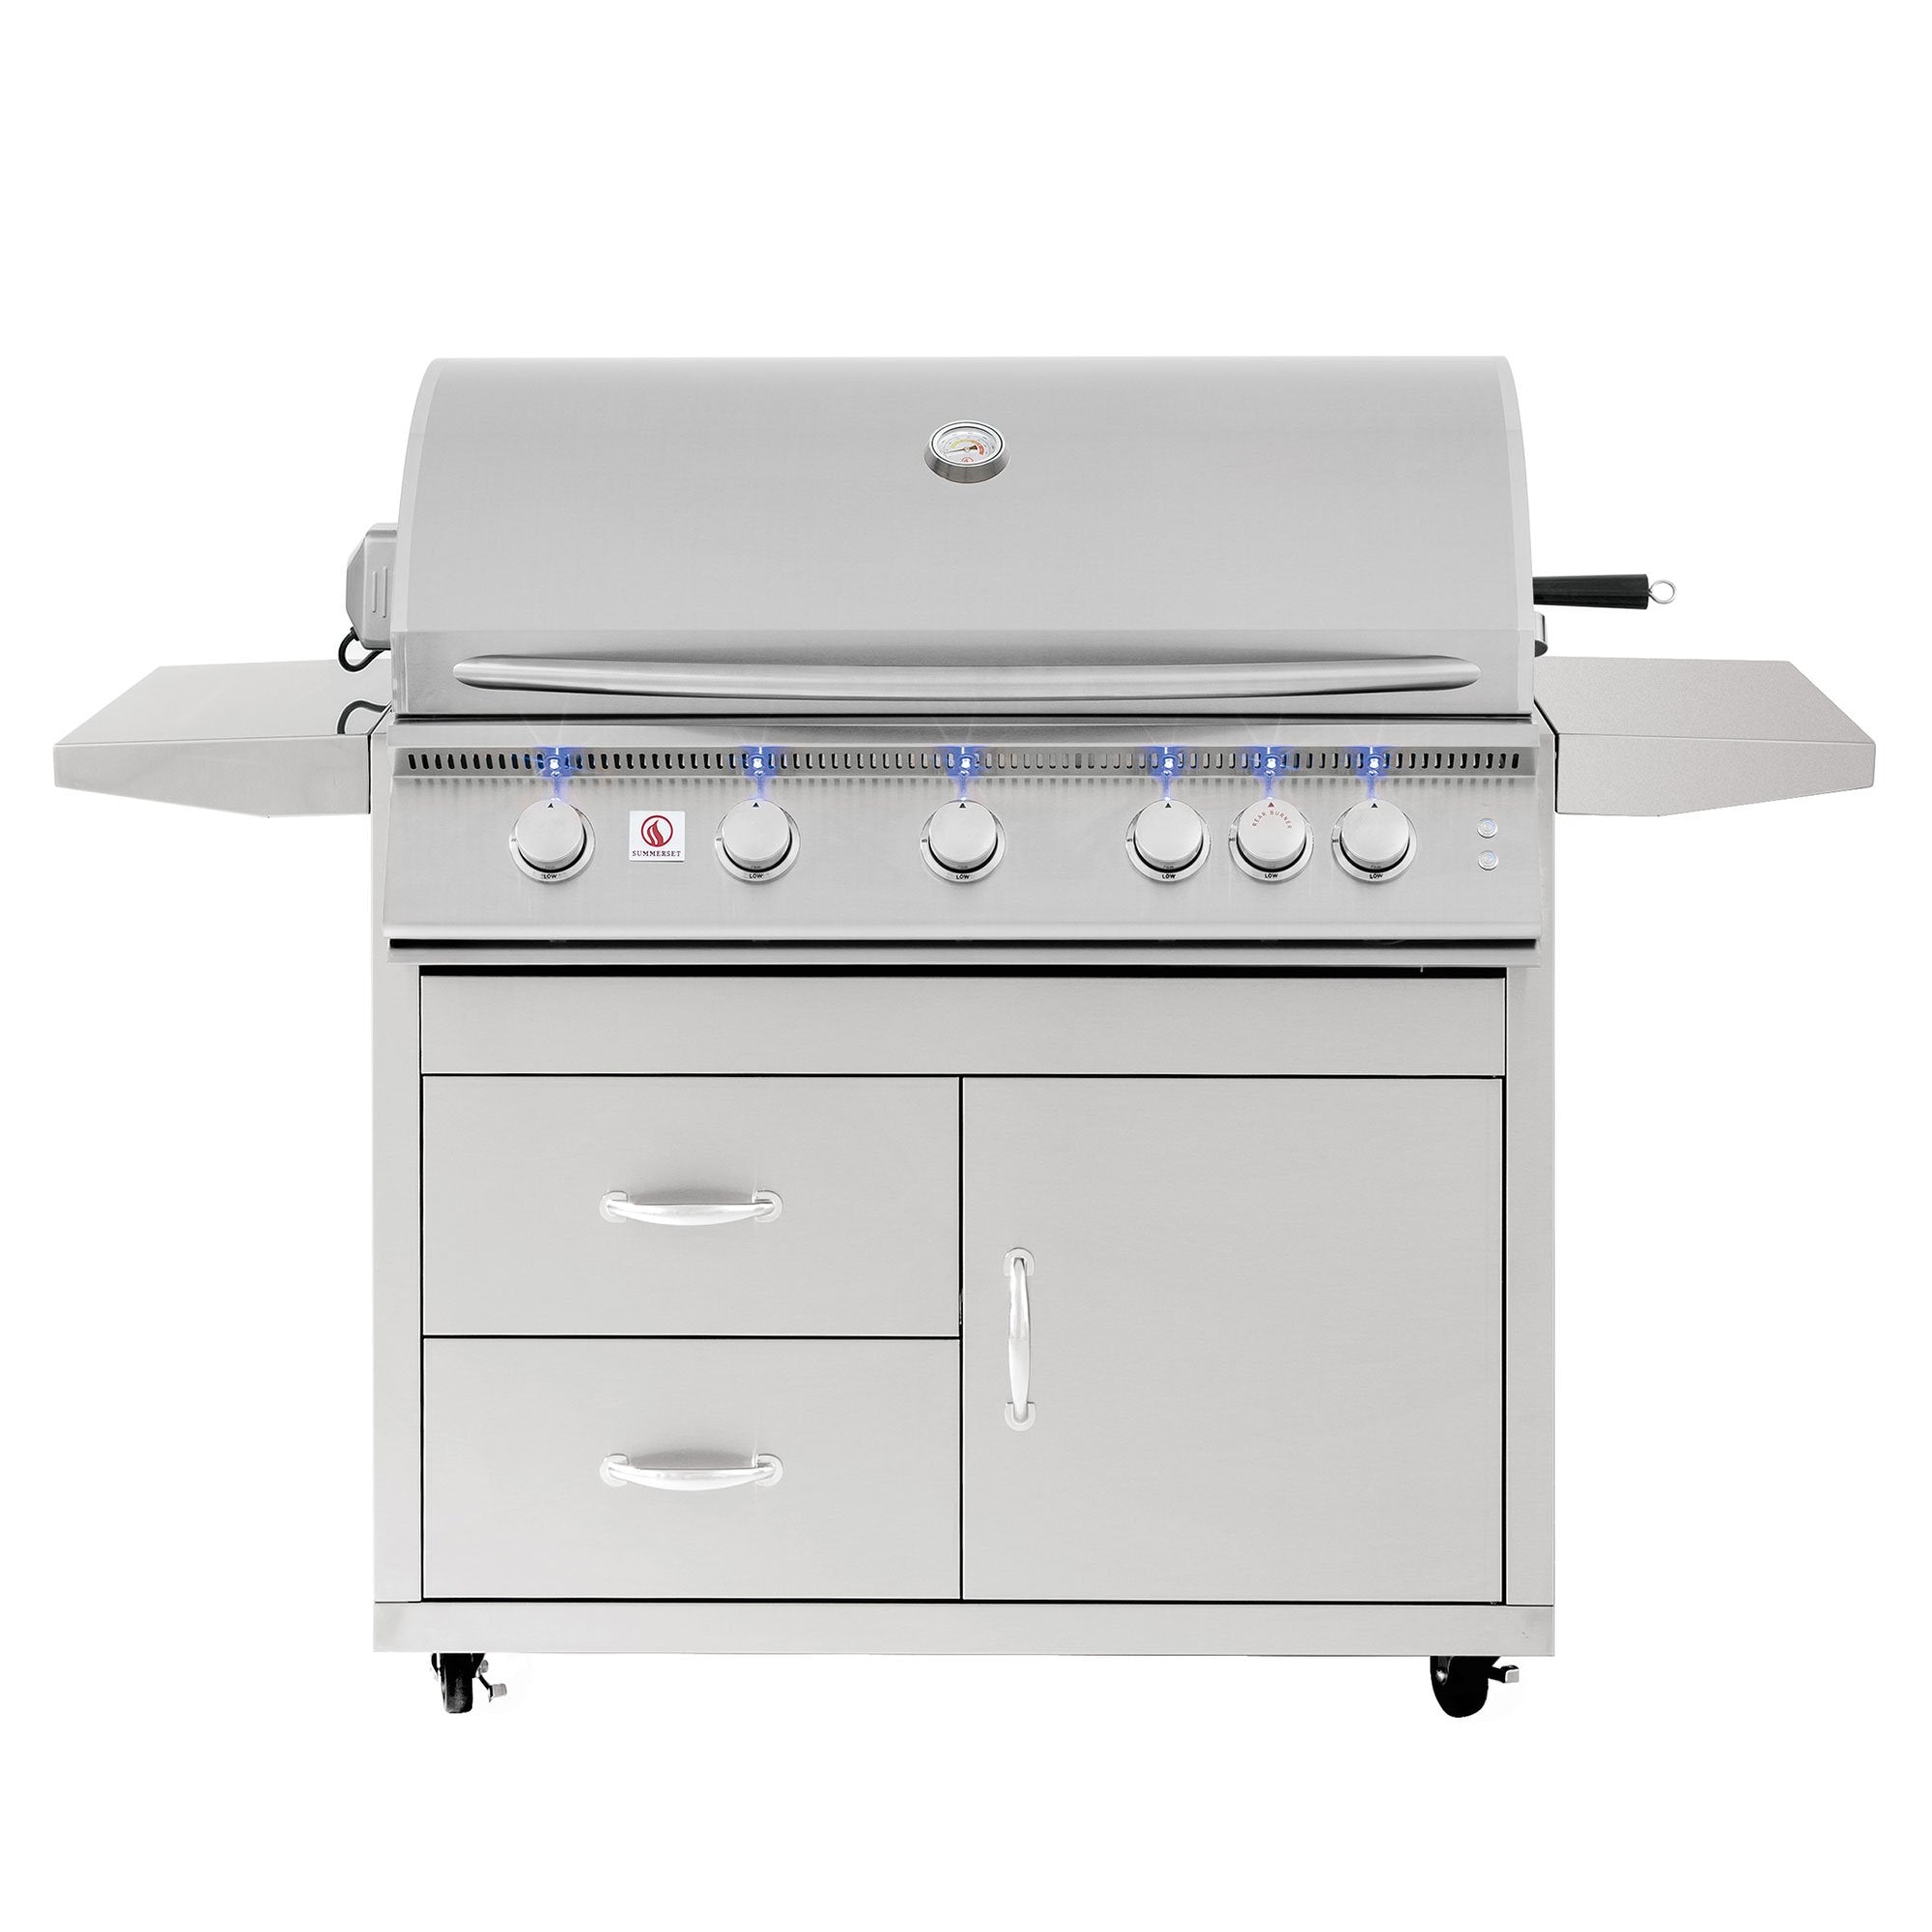 Summerset Sizzler Pro 40 Inch Freestanding Grill with Cart CART-SIZ40-DC